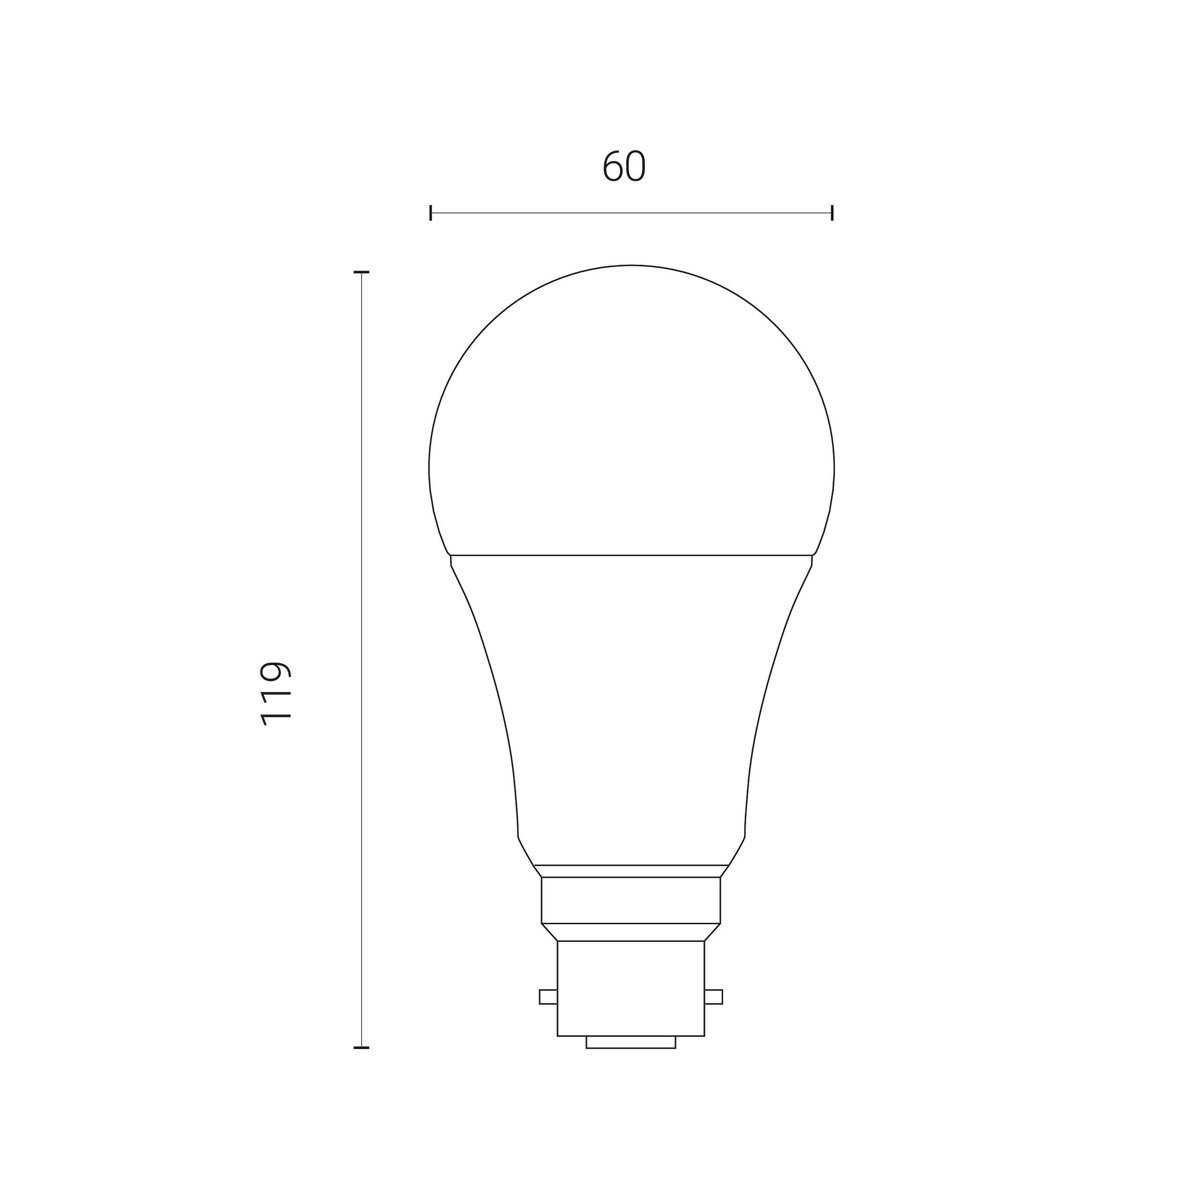 Line drawing of light bulb on white background with dimensions